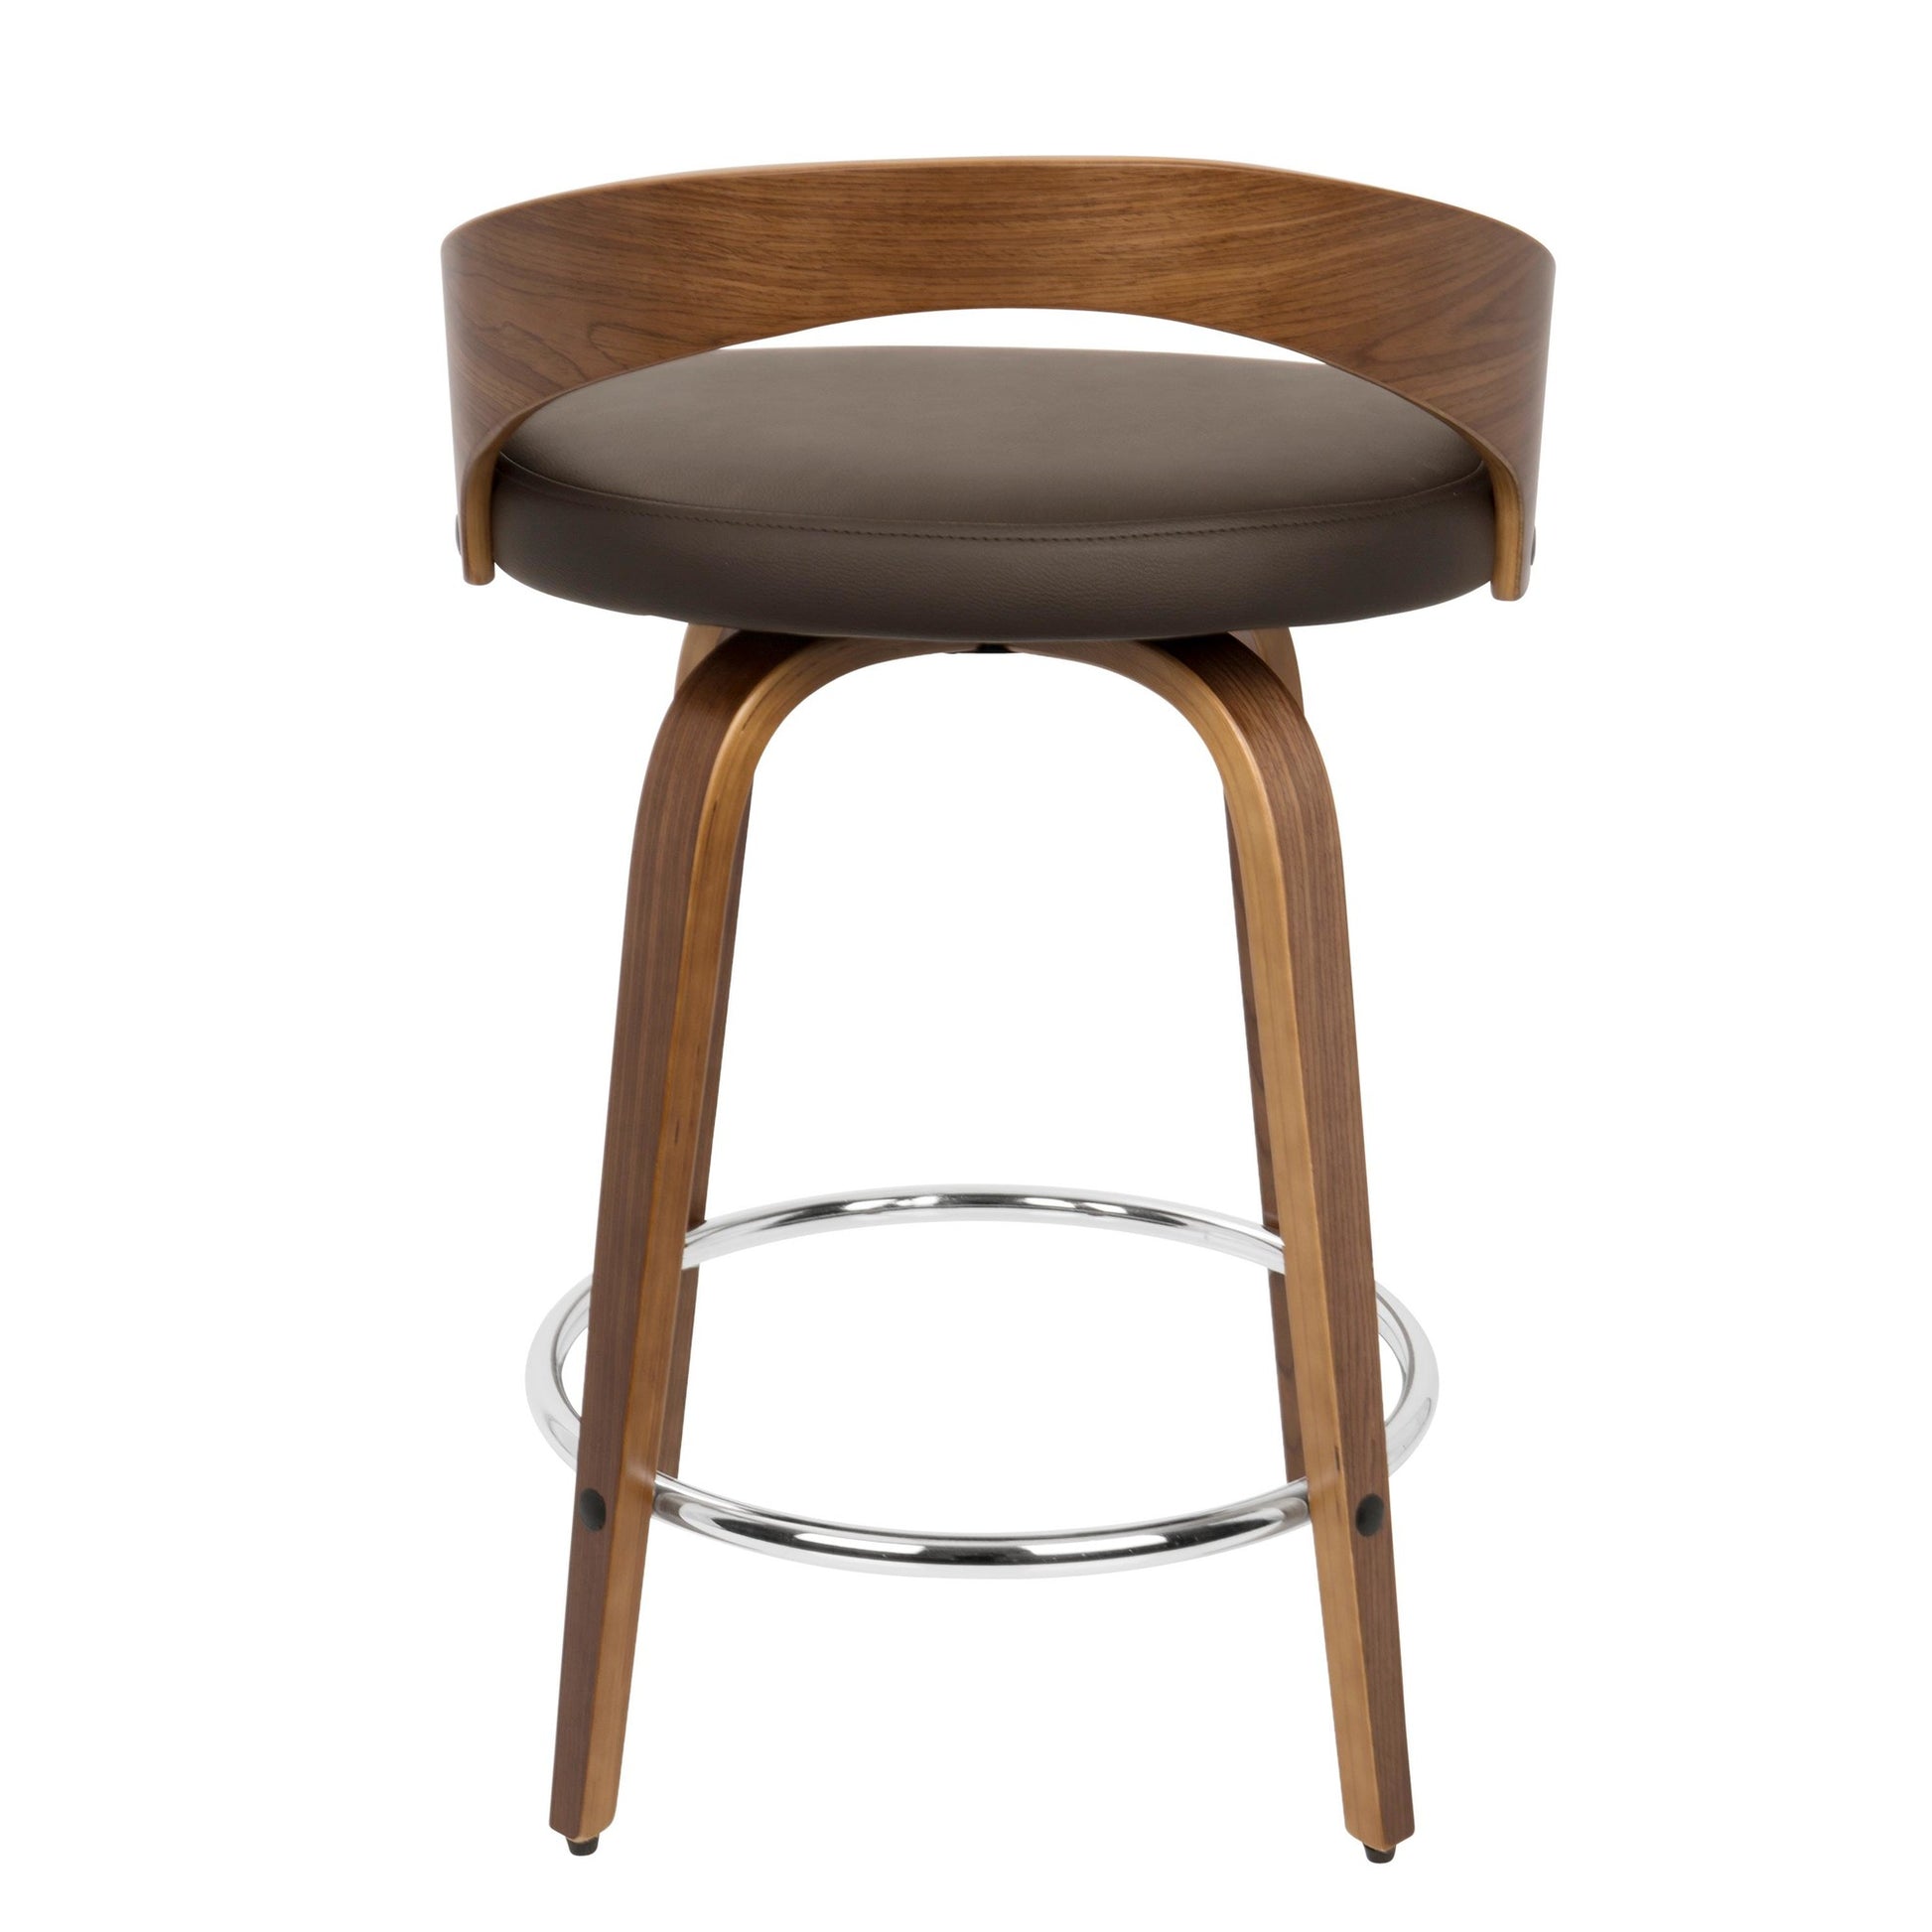 LumiSource Grotto Counter Stool - Set of 2-14